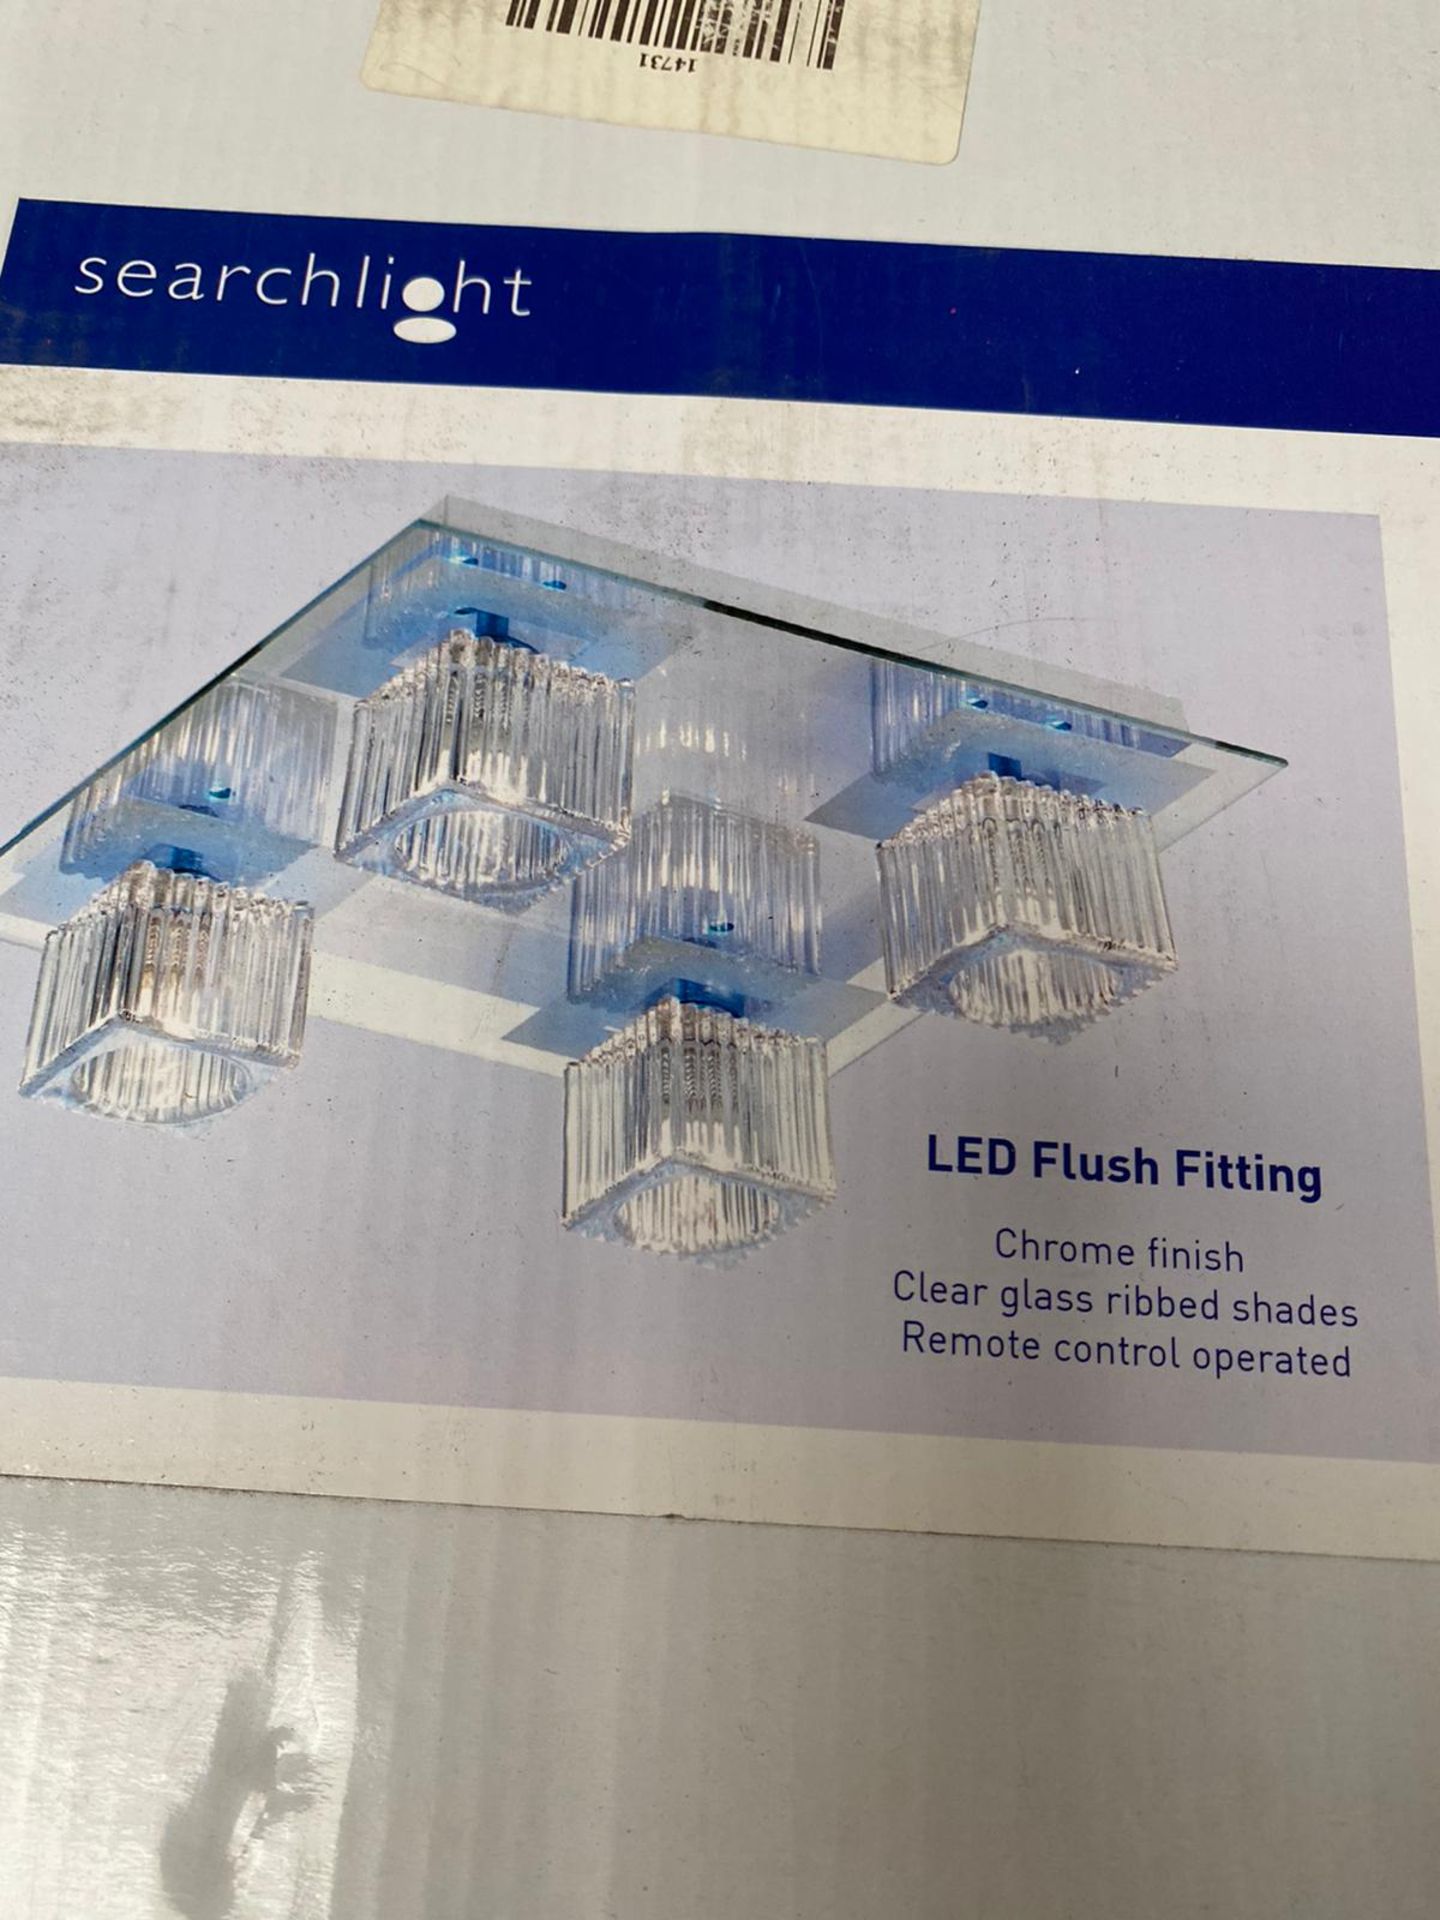 1 x Searchlight LED Flush Fitting in chrome - Ref: 1934-4CC- New and Boxed - RRP: £120 - Image 2 of 4